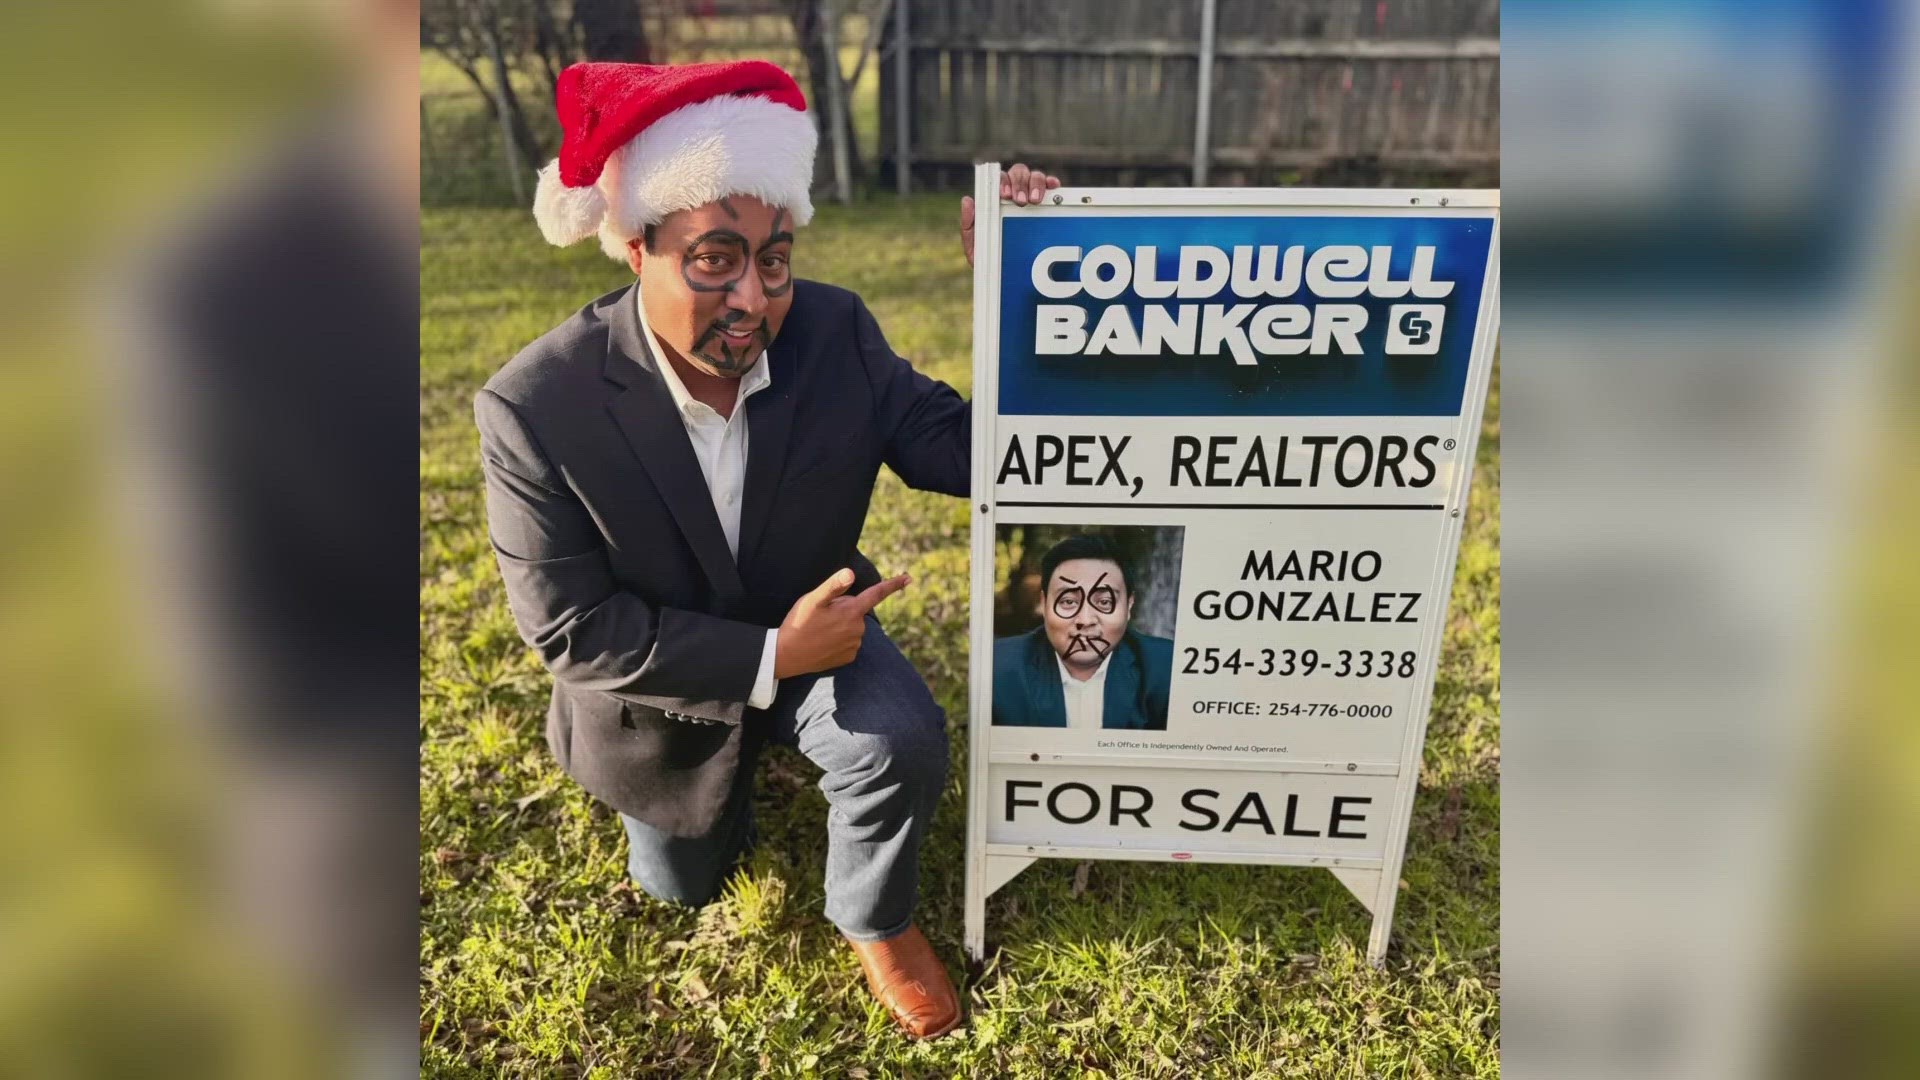 After a prankster graffitied one of Mario Gonzales' real estate signs, his hilarious response took social media by storm.